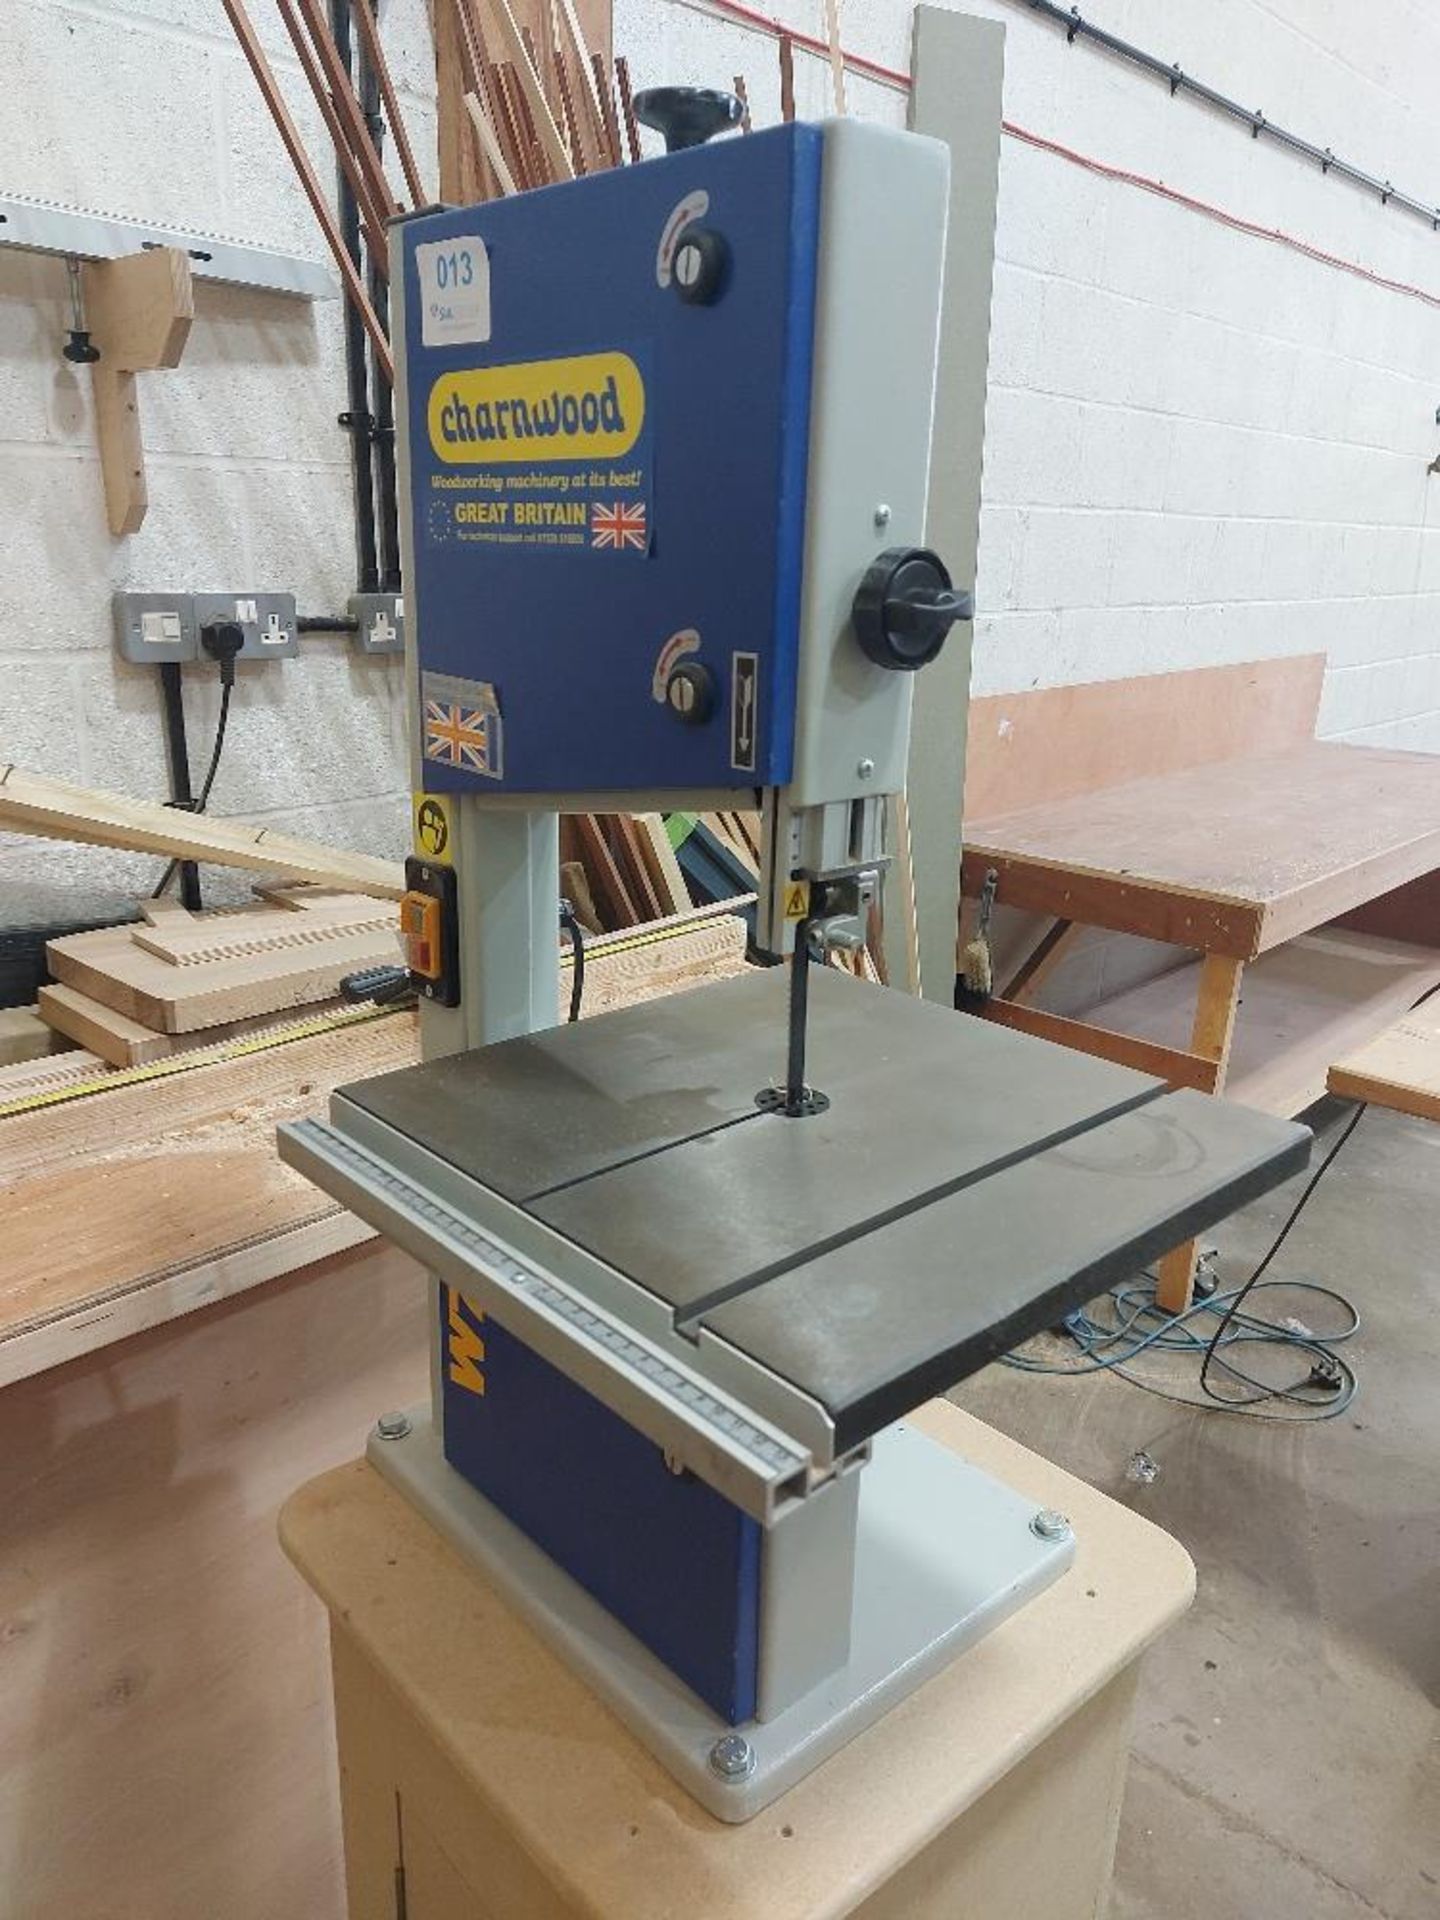 Charnwood W715 10" Woodworking Bandsaw With Mobile Stand - Image 3 of 6